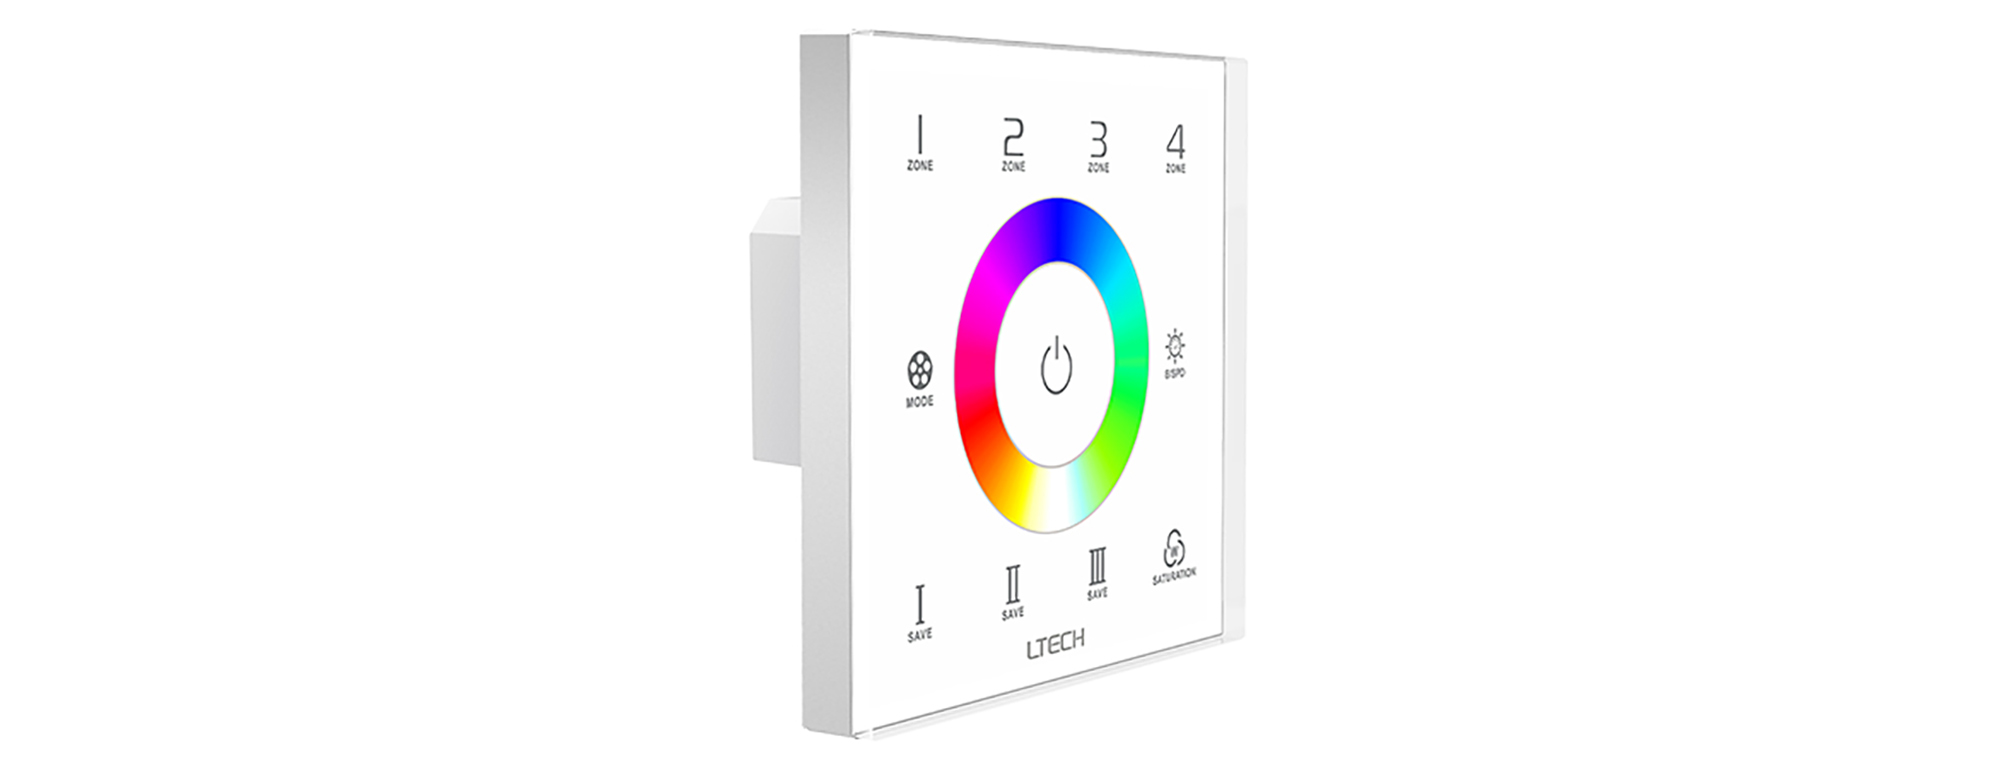 EX7S  RGB Touch Panel 4 Zones; RF 2.4GHz; DMX512 interface; Capacitive touch; 100-240Vac input; IP44.